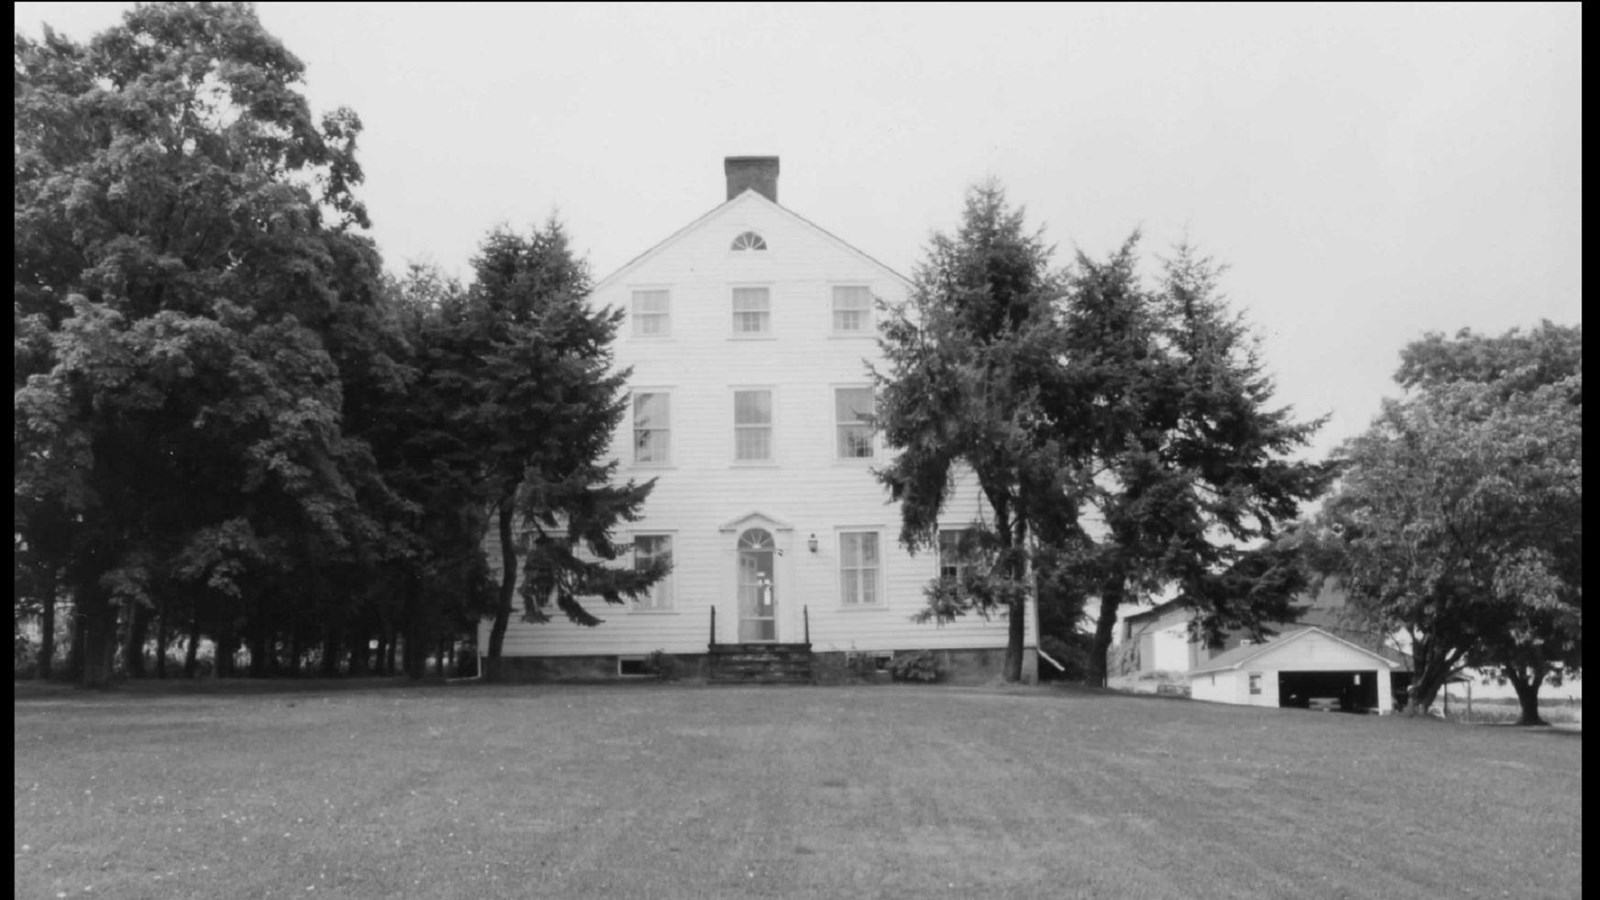 Black and white image of a white framed house framed by trees, with a grass lawn in foreground.